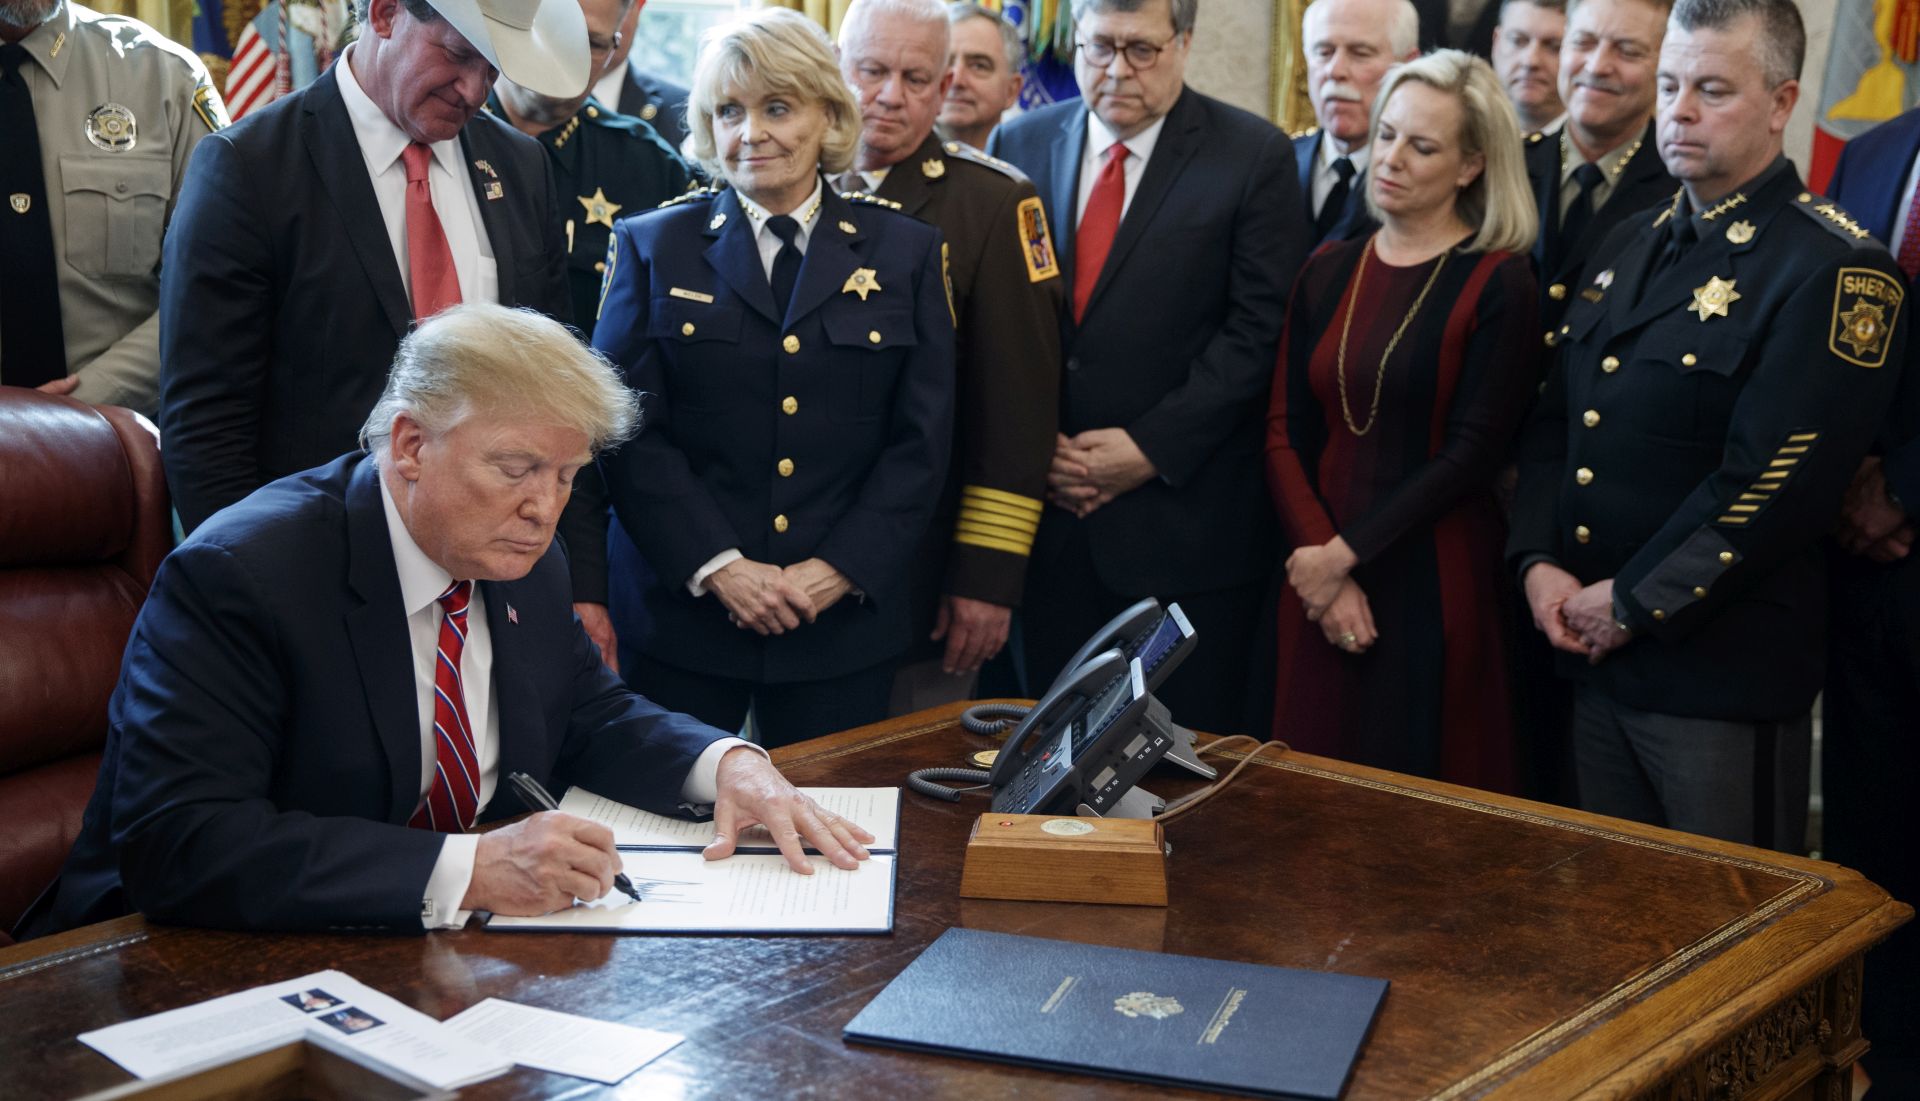 epa07440790 US President Donald J. Trump delivers remarks on the national security and humanitarian crisis on the southern border and vetoes the legislation that strikes down his national emergency declaration at the southern border a ceremony in the Oval Office of the White House in Washington, DC, USA, 15 March 2019. President Trump's veto, his first, sends the resolution back to Congress where it will require a 2/3 vote in each house to overturn.  EPA/SHAWN THEW